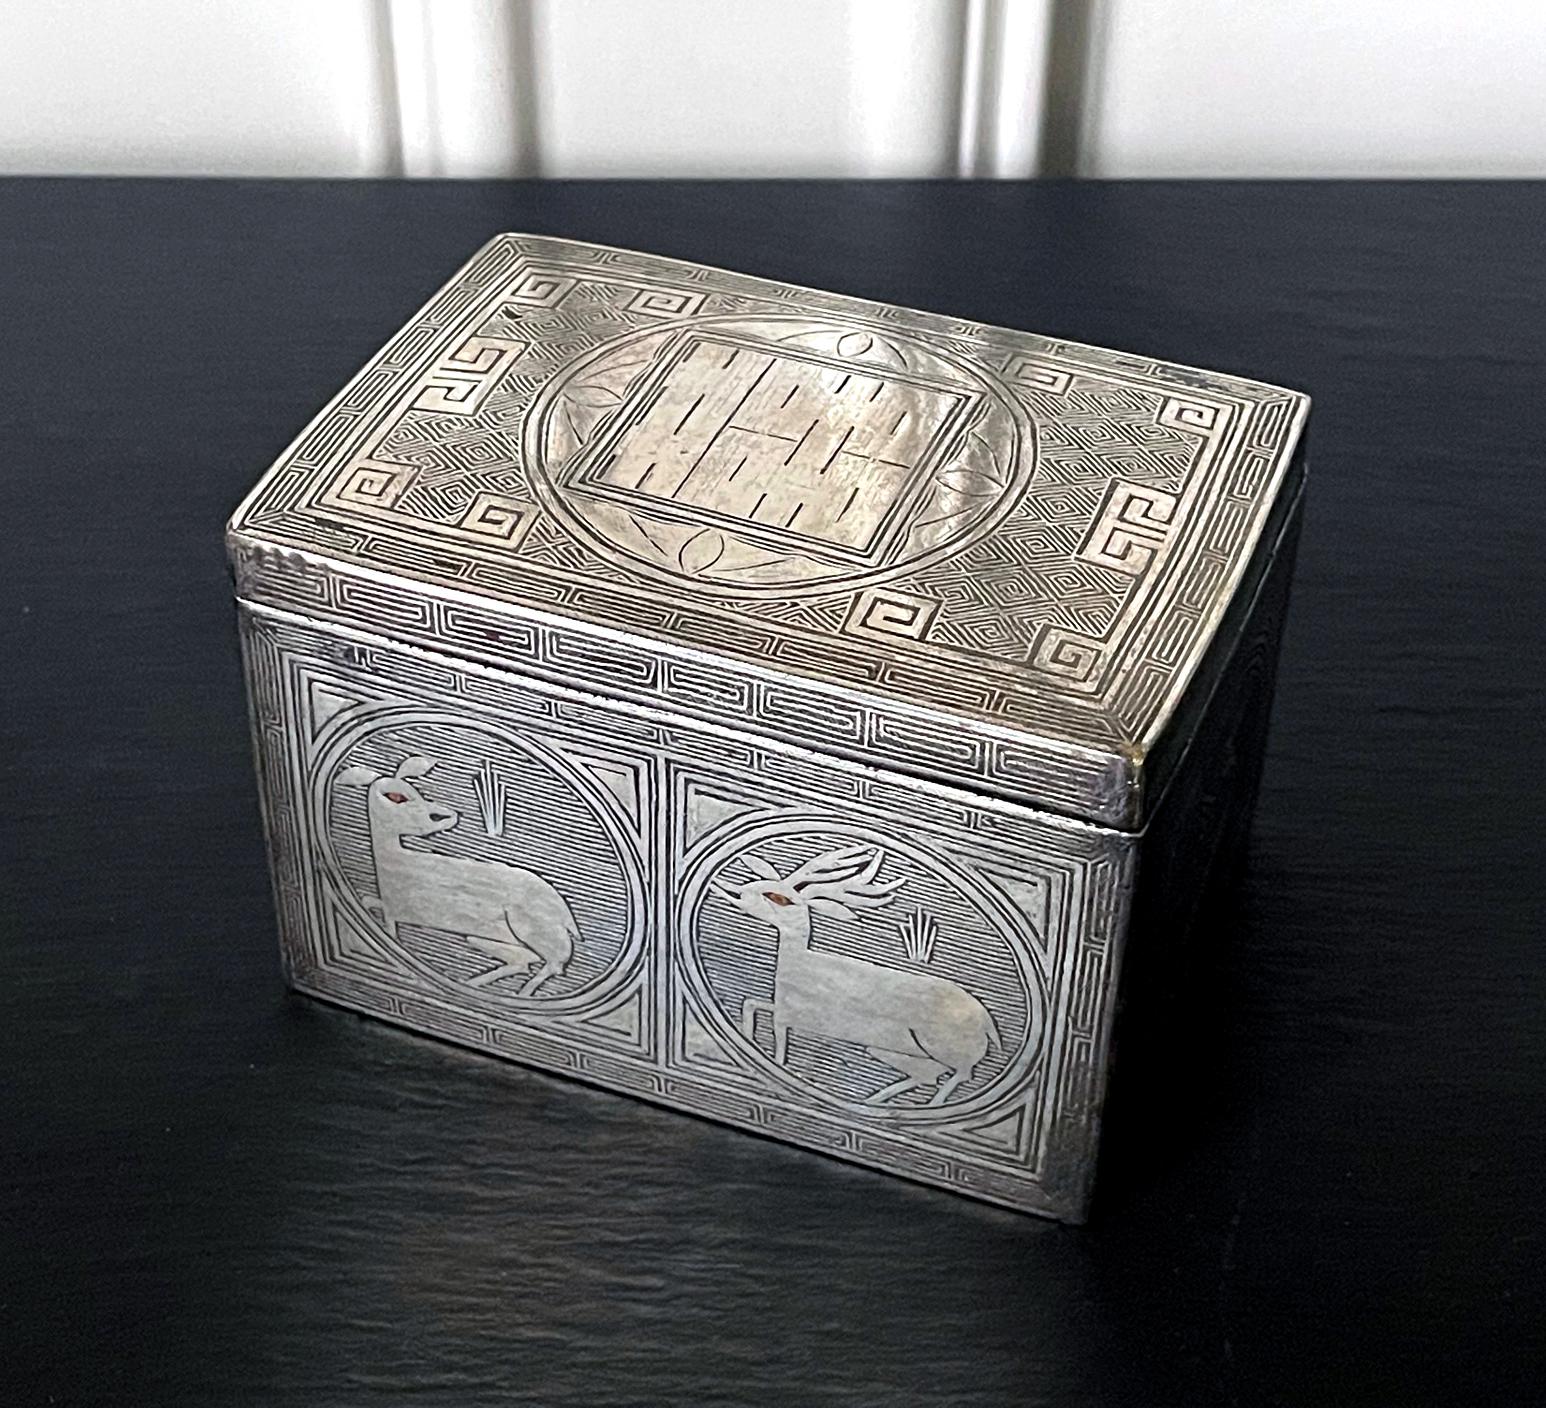 A fine Korean iron box used to store tobacco leaves dated to the late Joseon Dynasty circa 19th century. The box is made from iron and has a heavy weight, although the wears along the edges of the lid and base exposes a bronze metal color